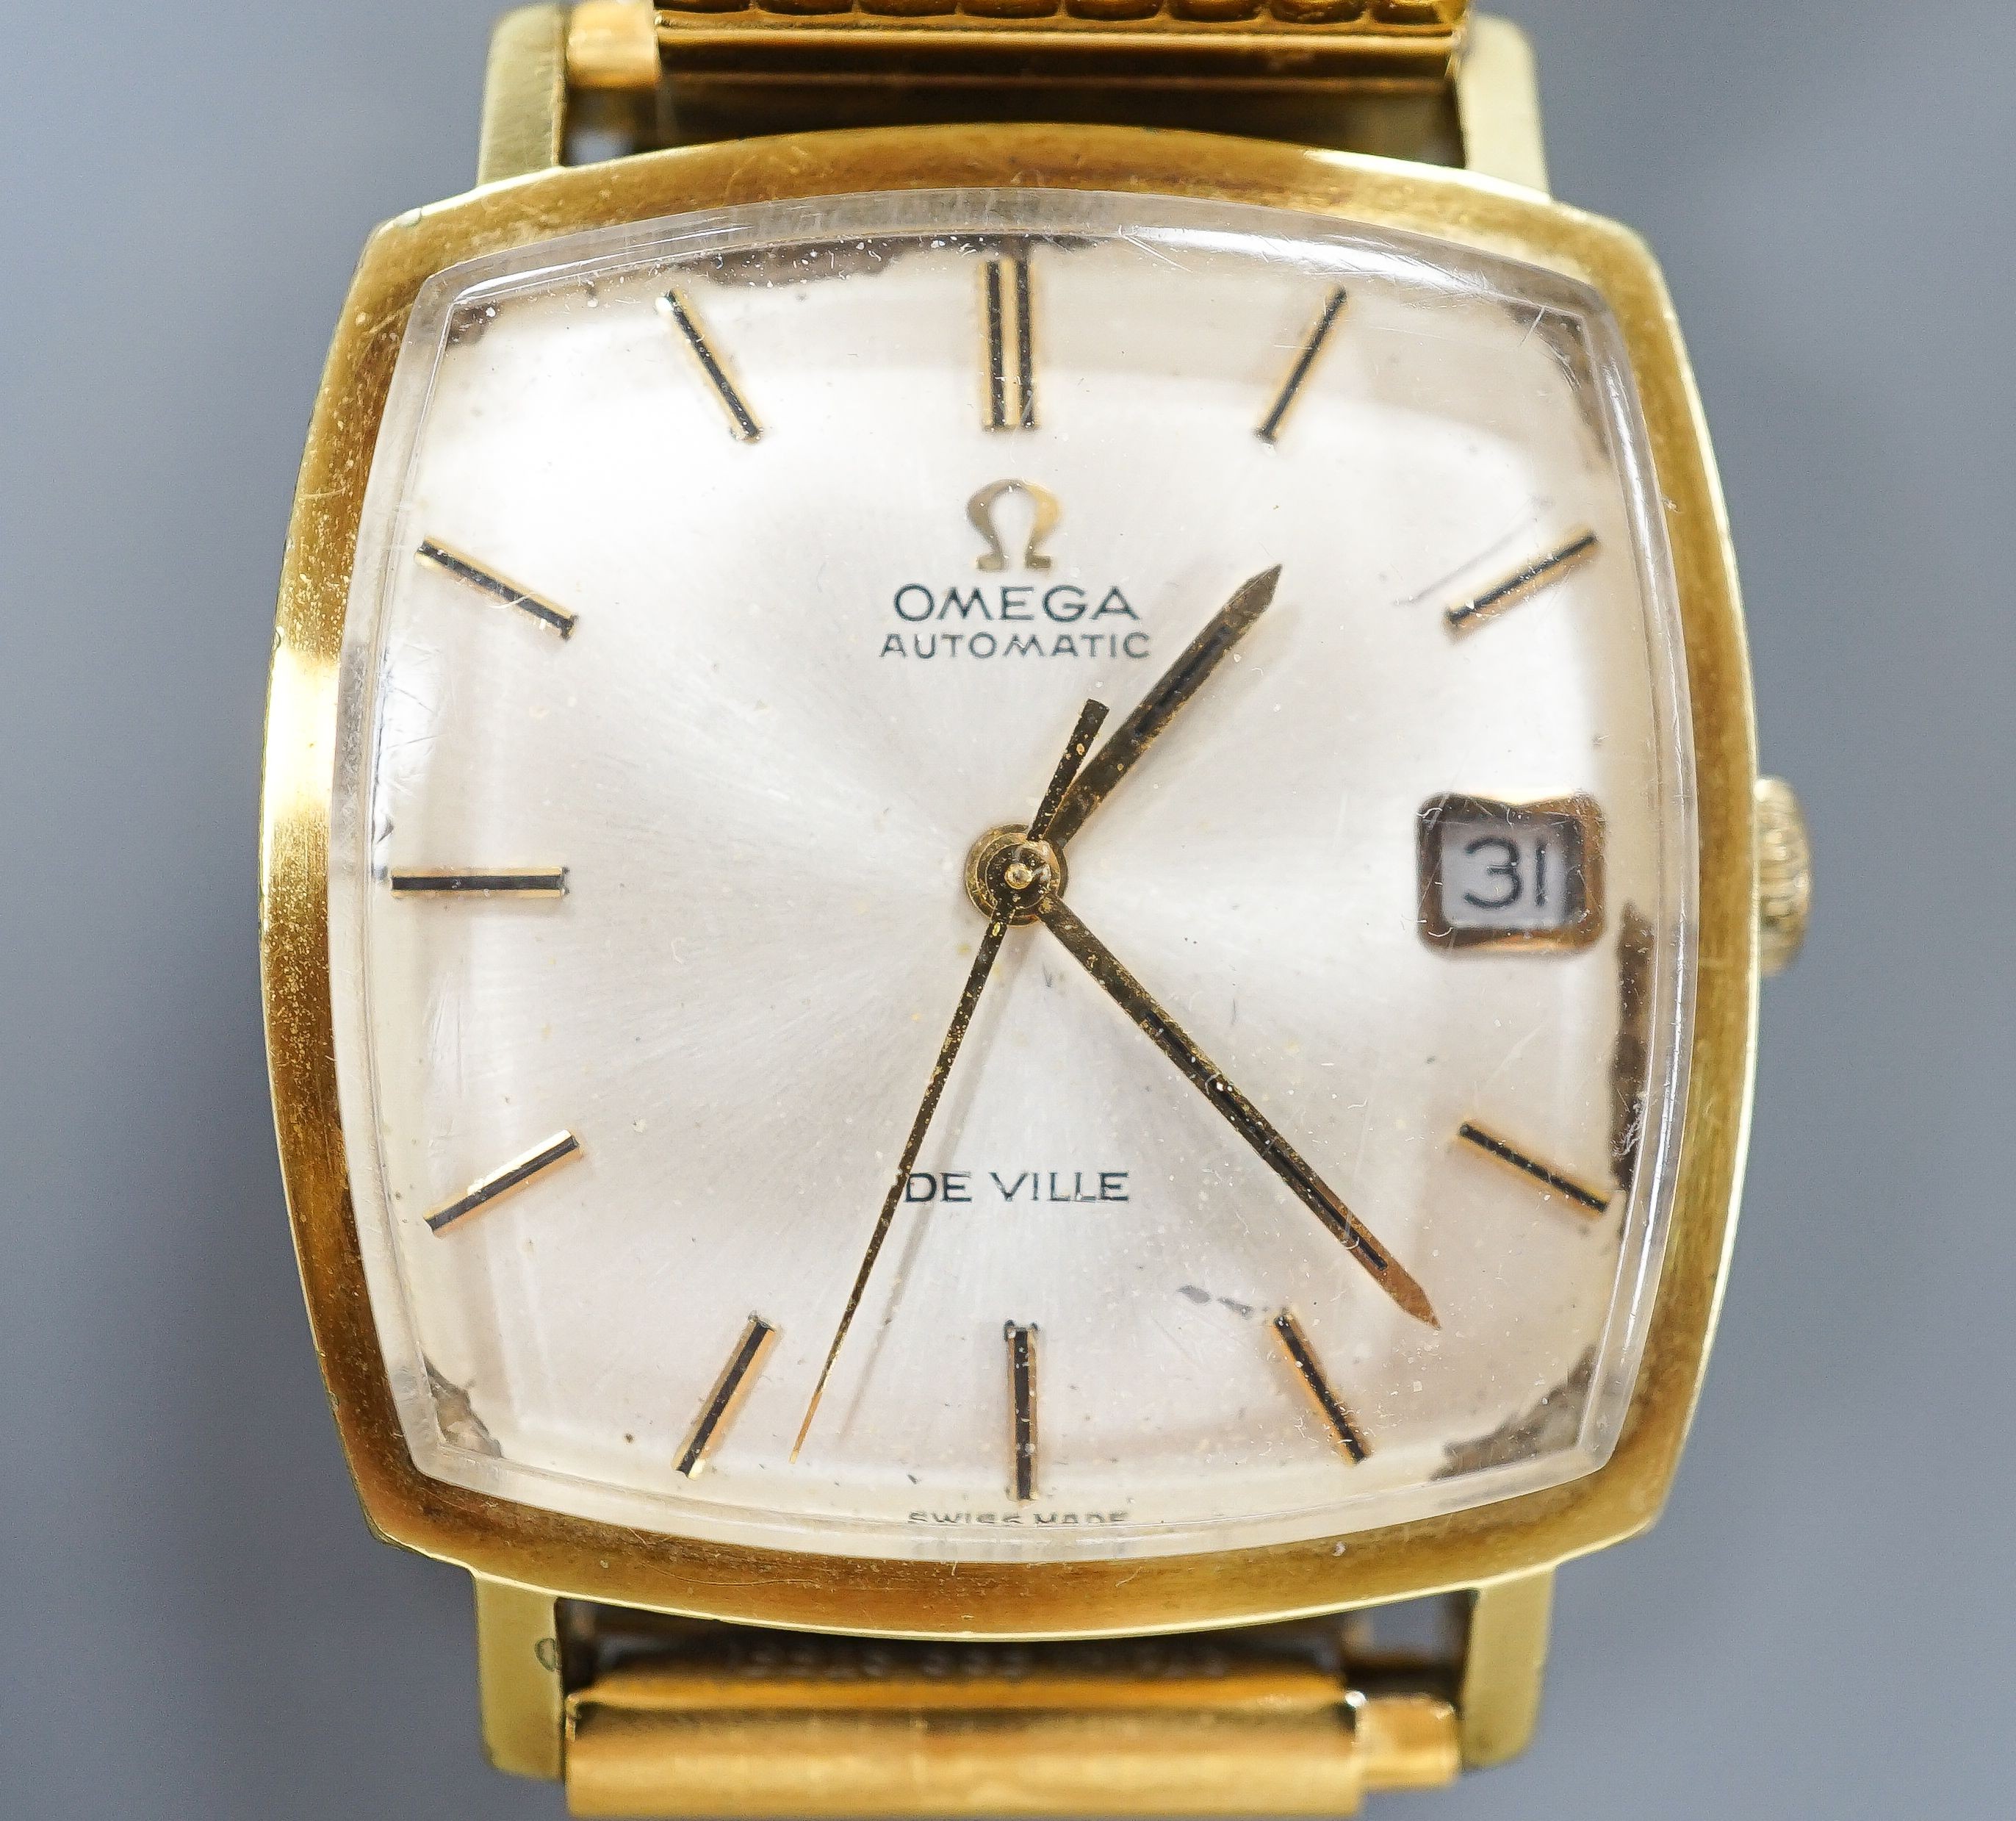 A gentleman's steel and gold plated Omega De Ville automatic wrist watch, on associated flexible strap, case diameter 32mm, no box or papers.